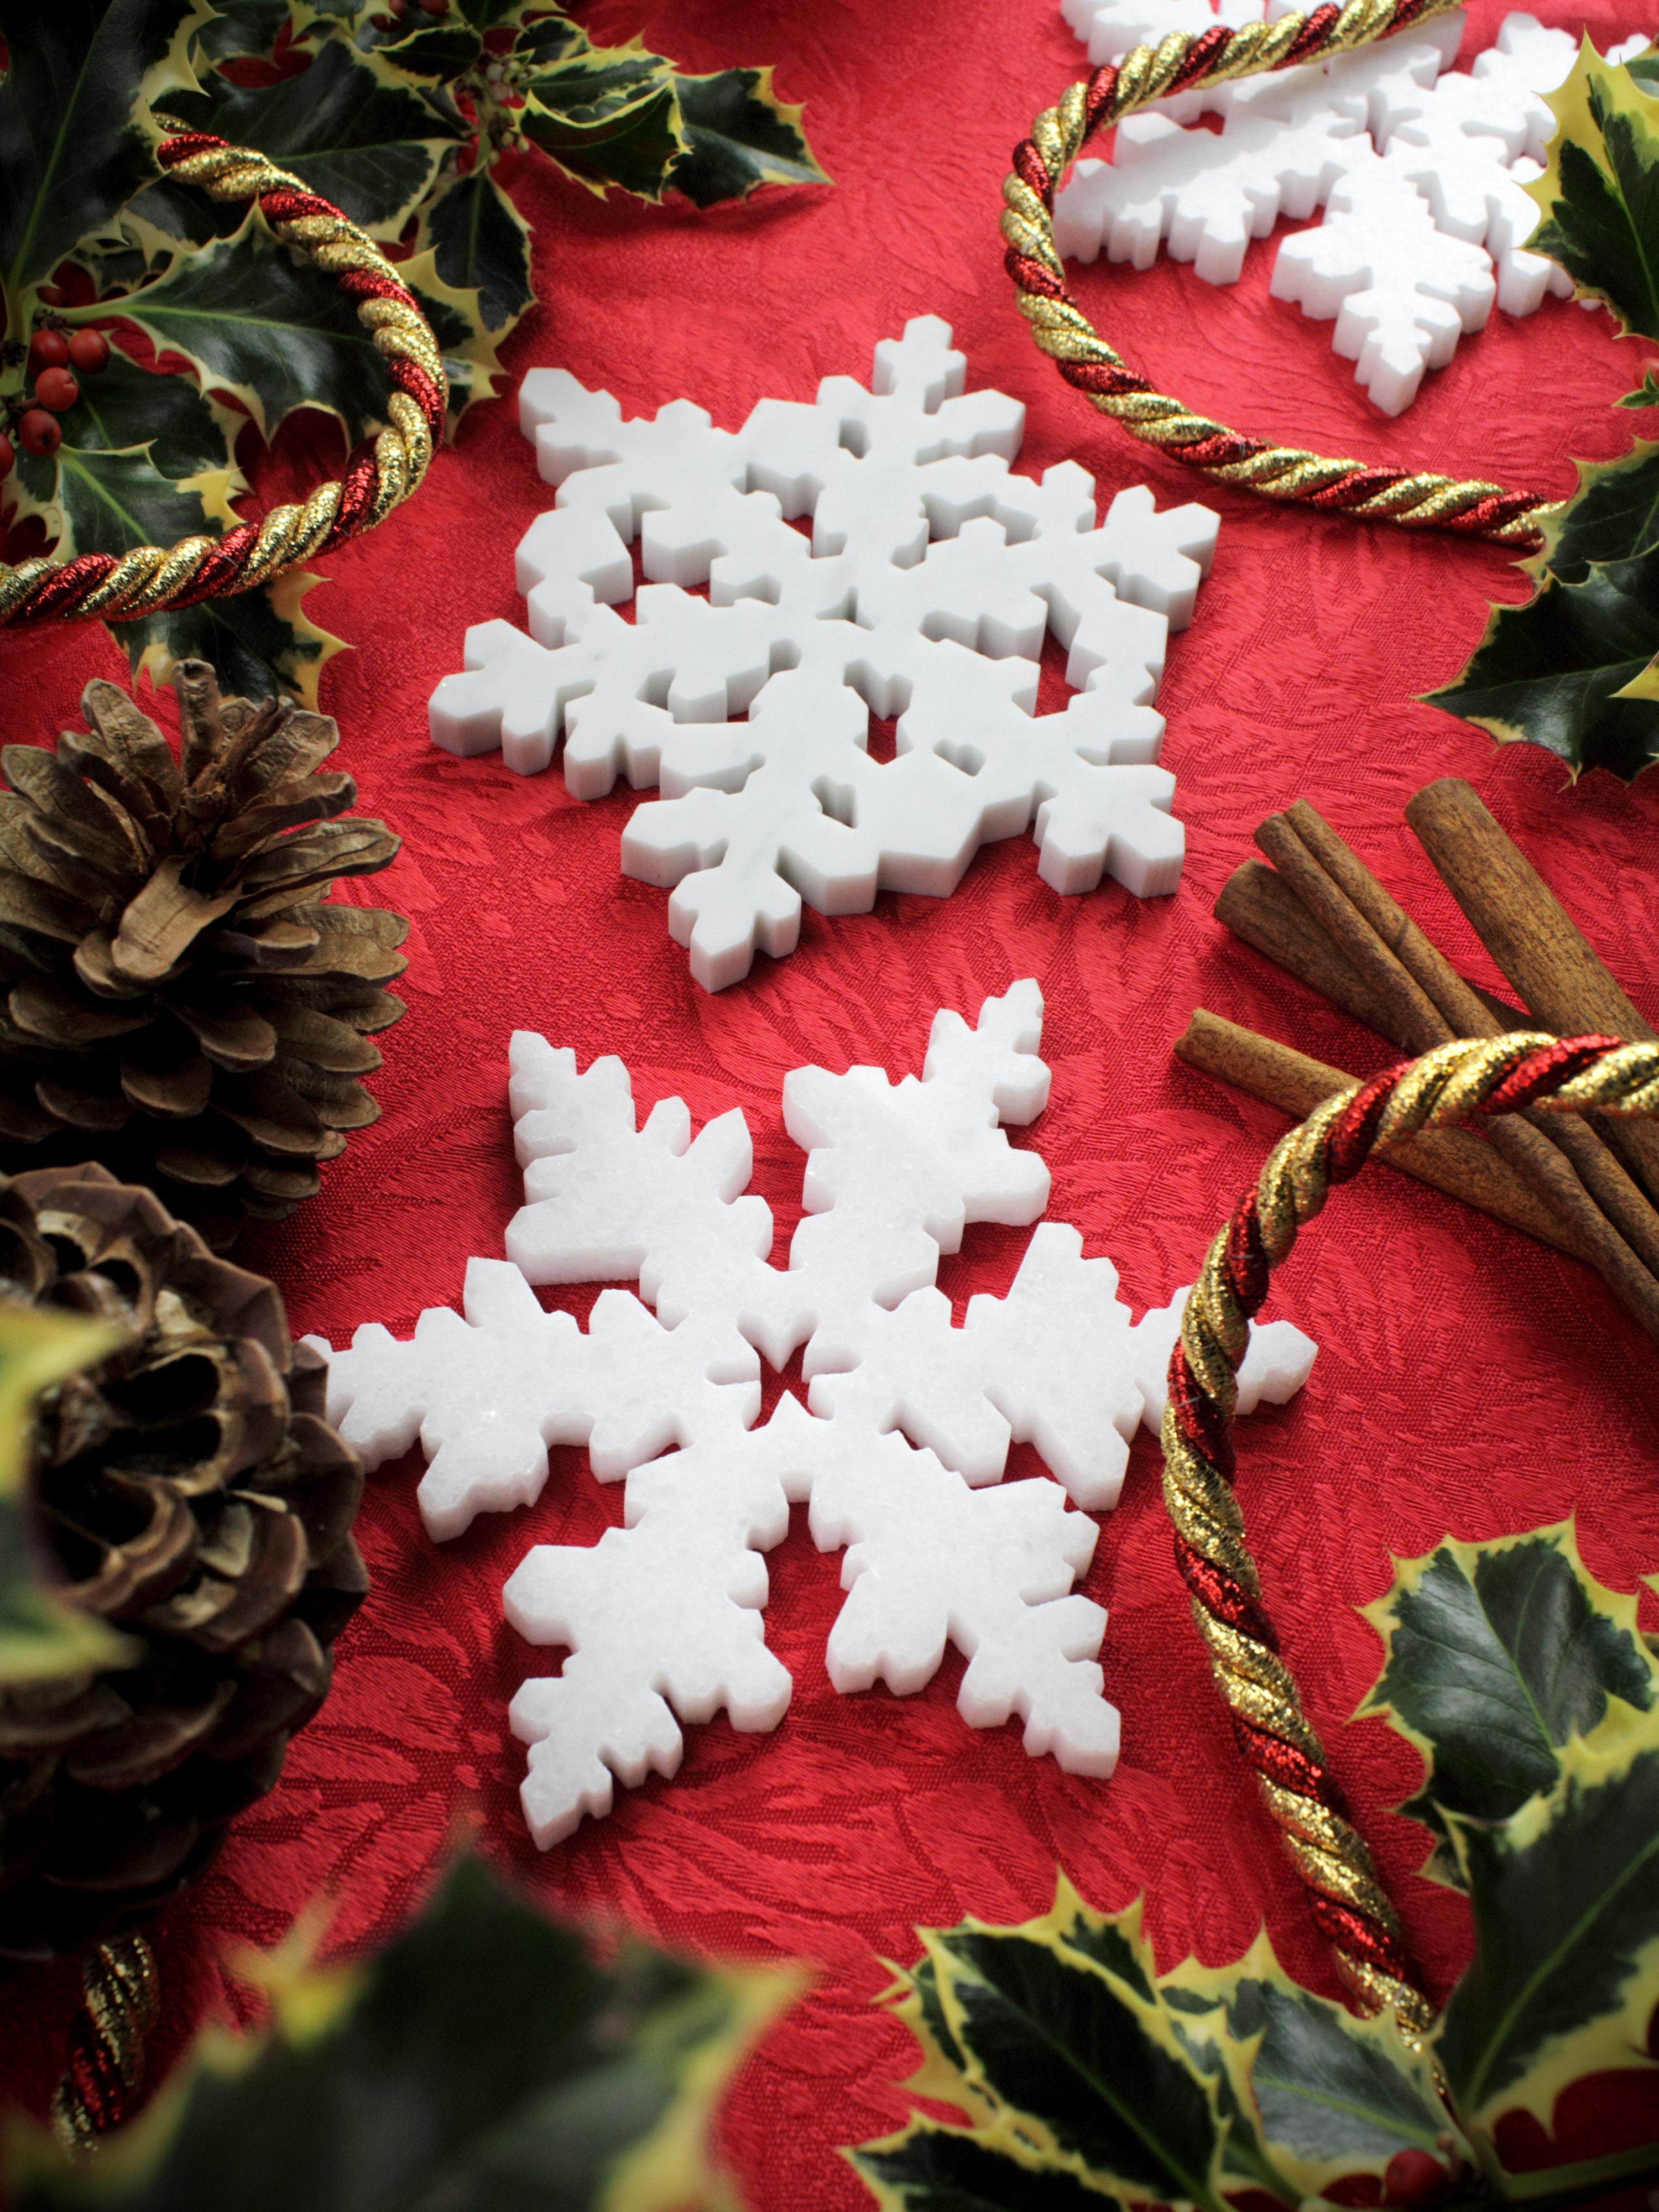 This 'Winter wonderland Snowflake' coaster in White Marble,  inspired by ice crystals, are the perfect tasteful gift for the winter and Christmas period.
Coaster in polished absolute crystalline white marble from Italy.
Thanks to their shape and